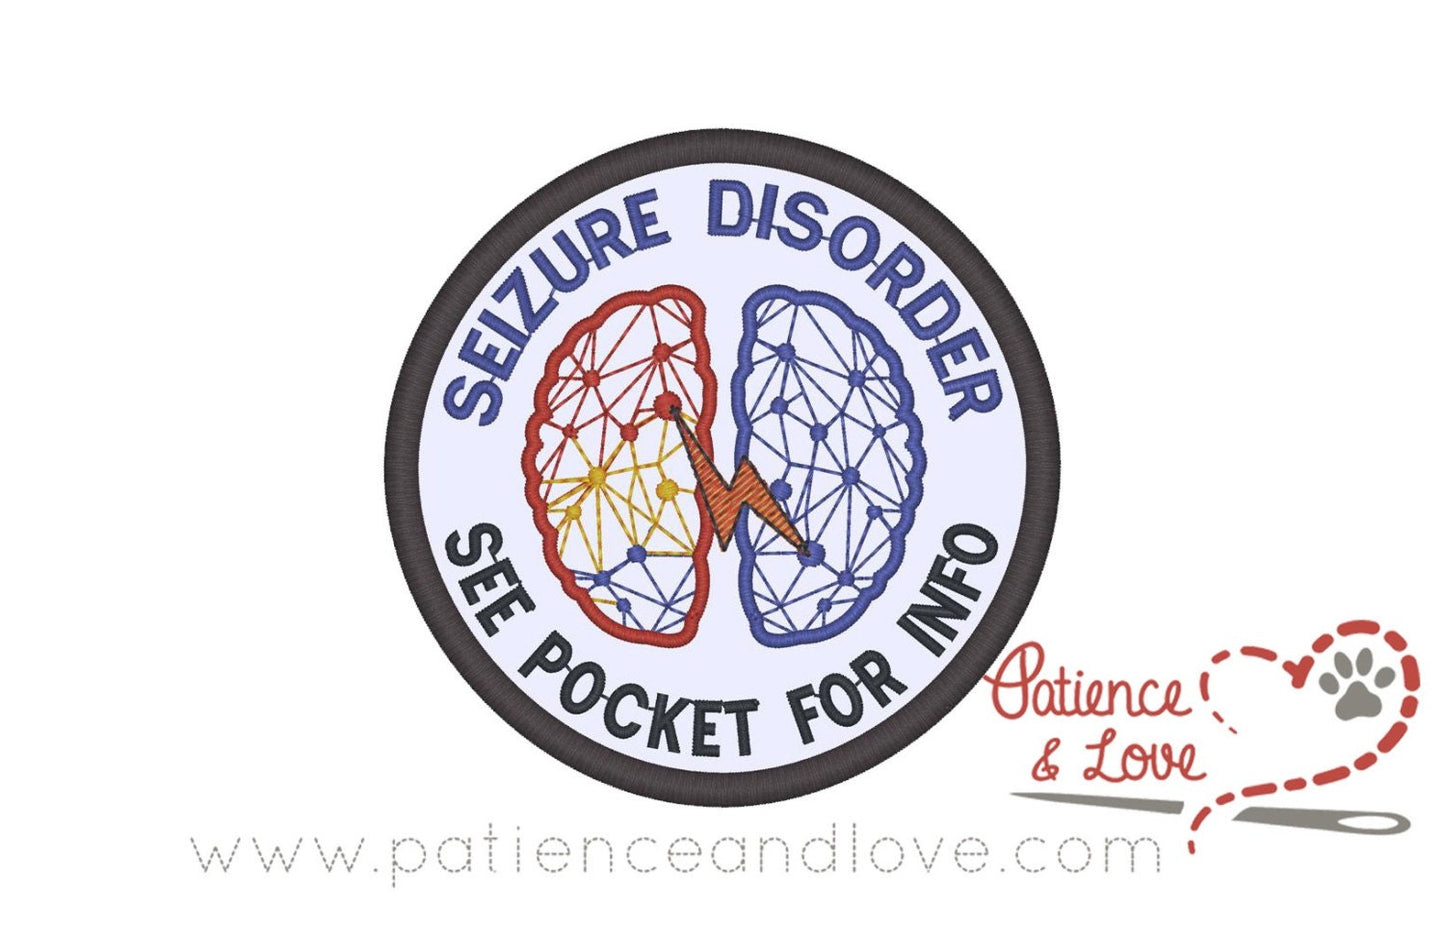 Seizure disorder See pocket for info, brain embroidered in center, 3 inch round patch